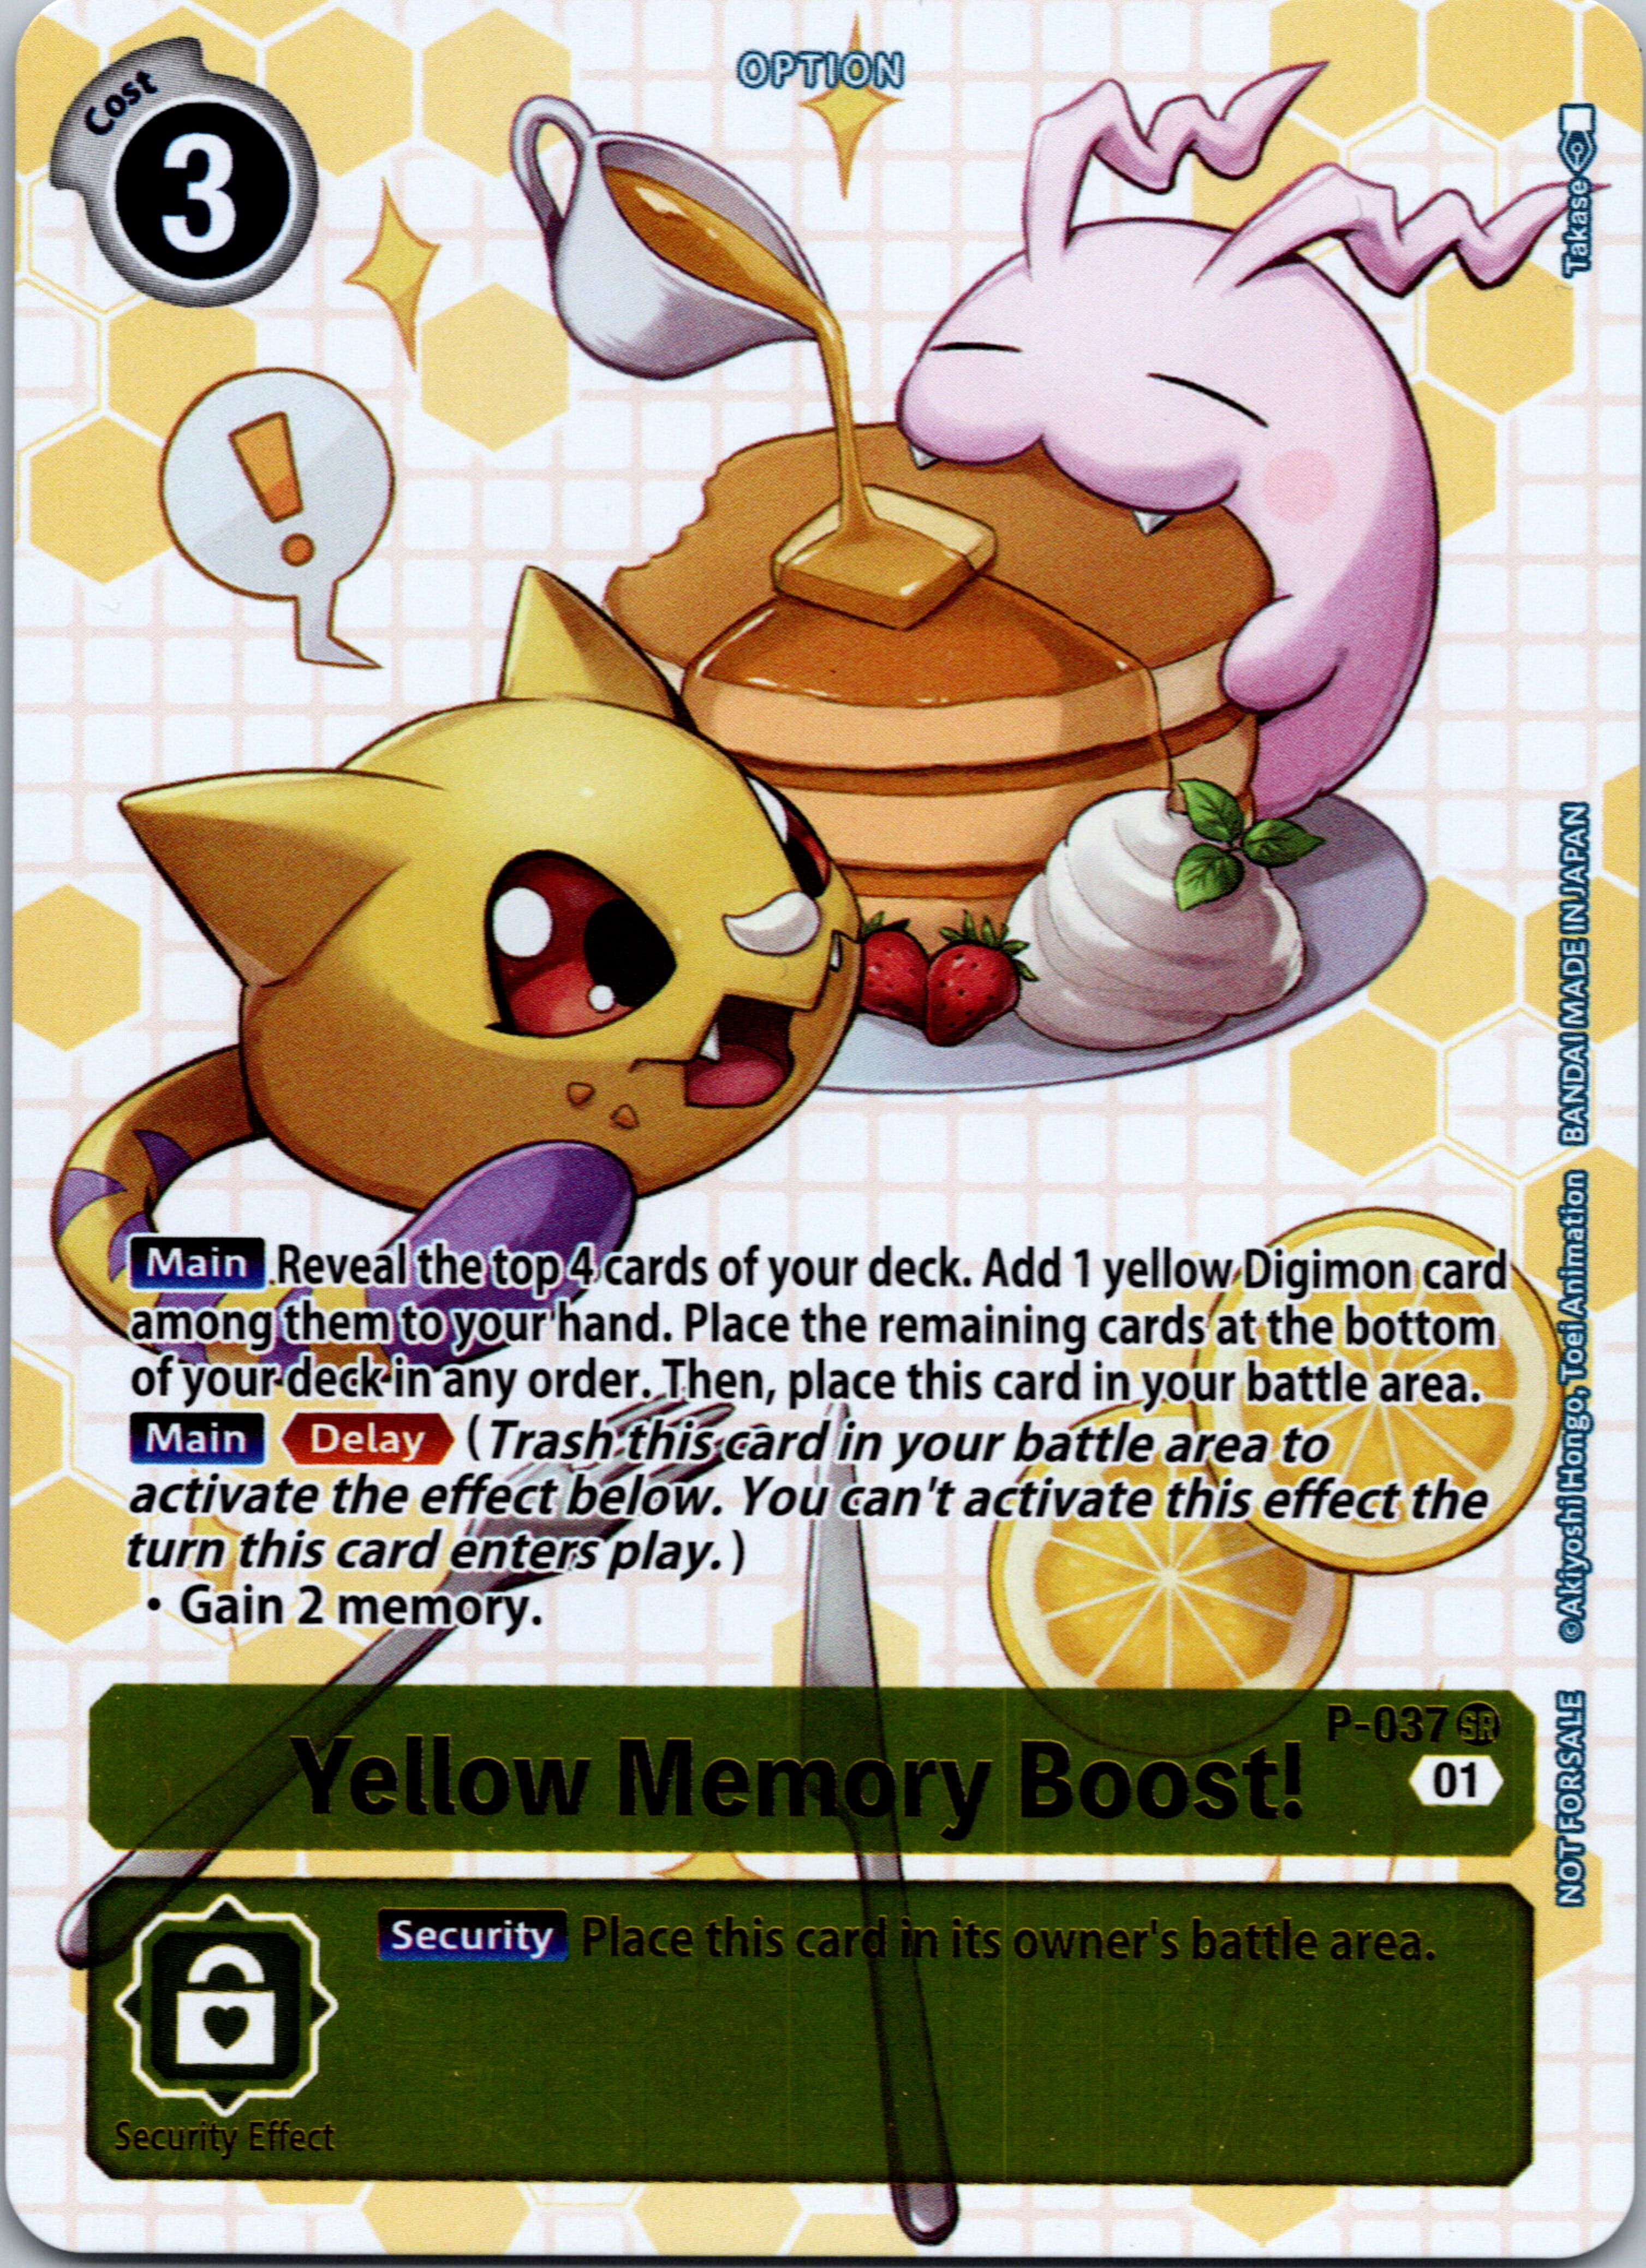 Yellow Memory Boost! - P-037 (Next Adventure Box Promotion Pack) [P-037] [Digimon Promotion Cards] Normal